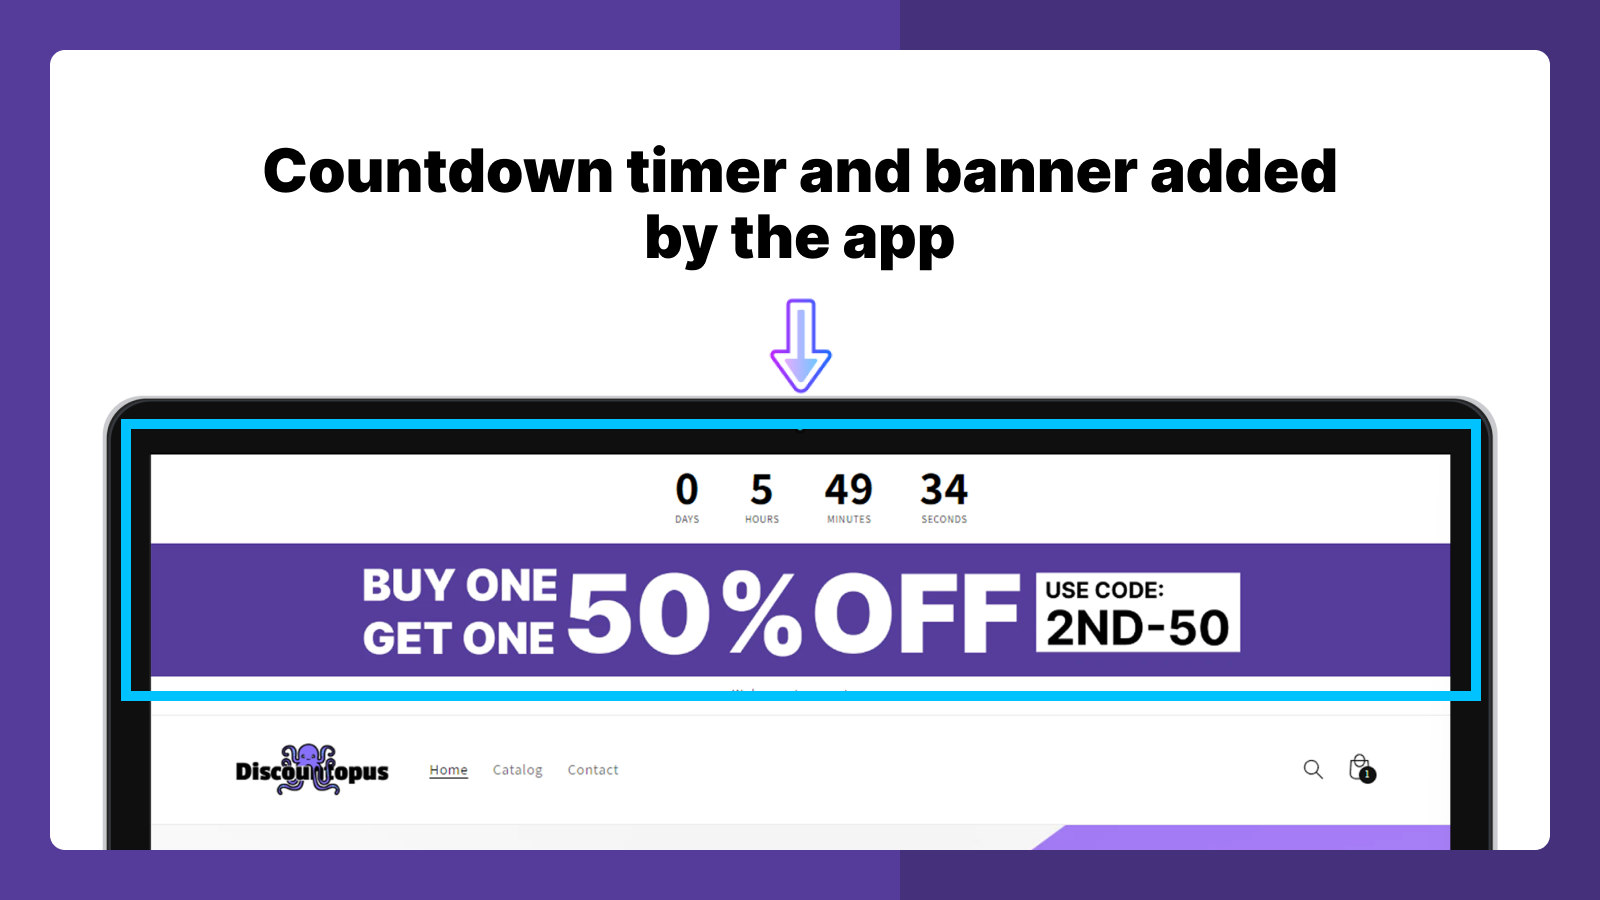 Countdown timer and banner added by the app